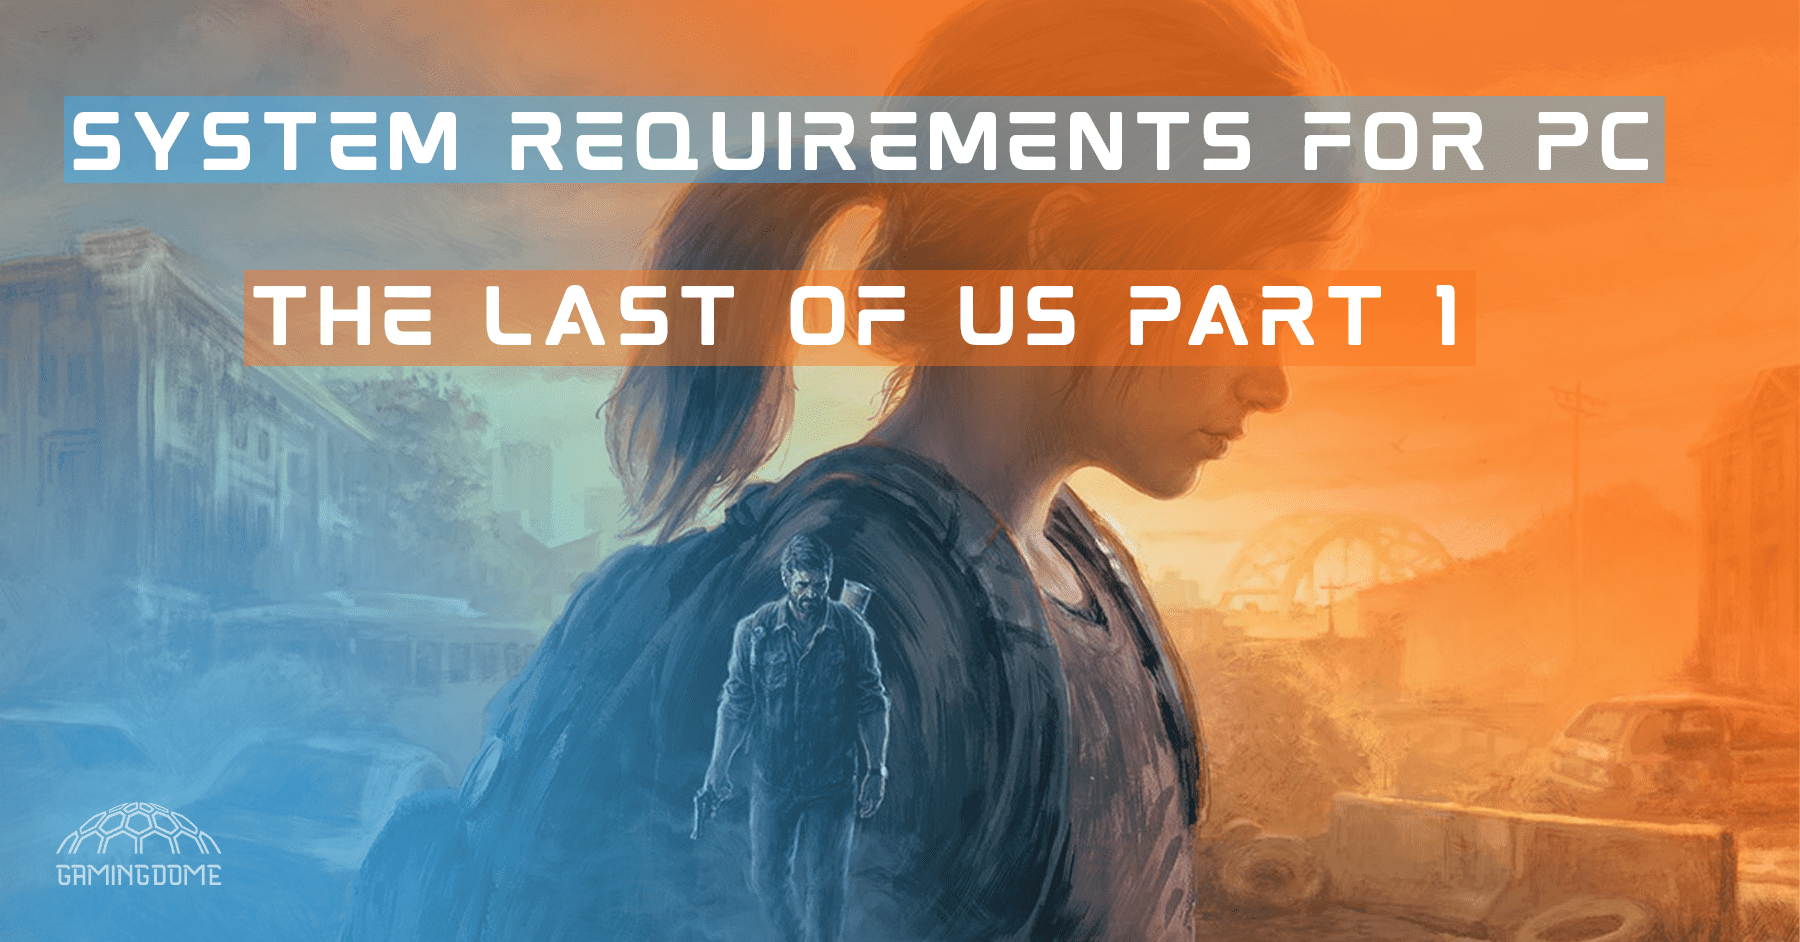 “The Last of Us Part 1” System Requirements for PC